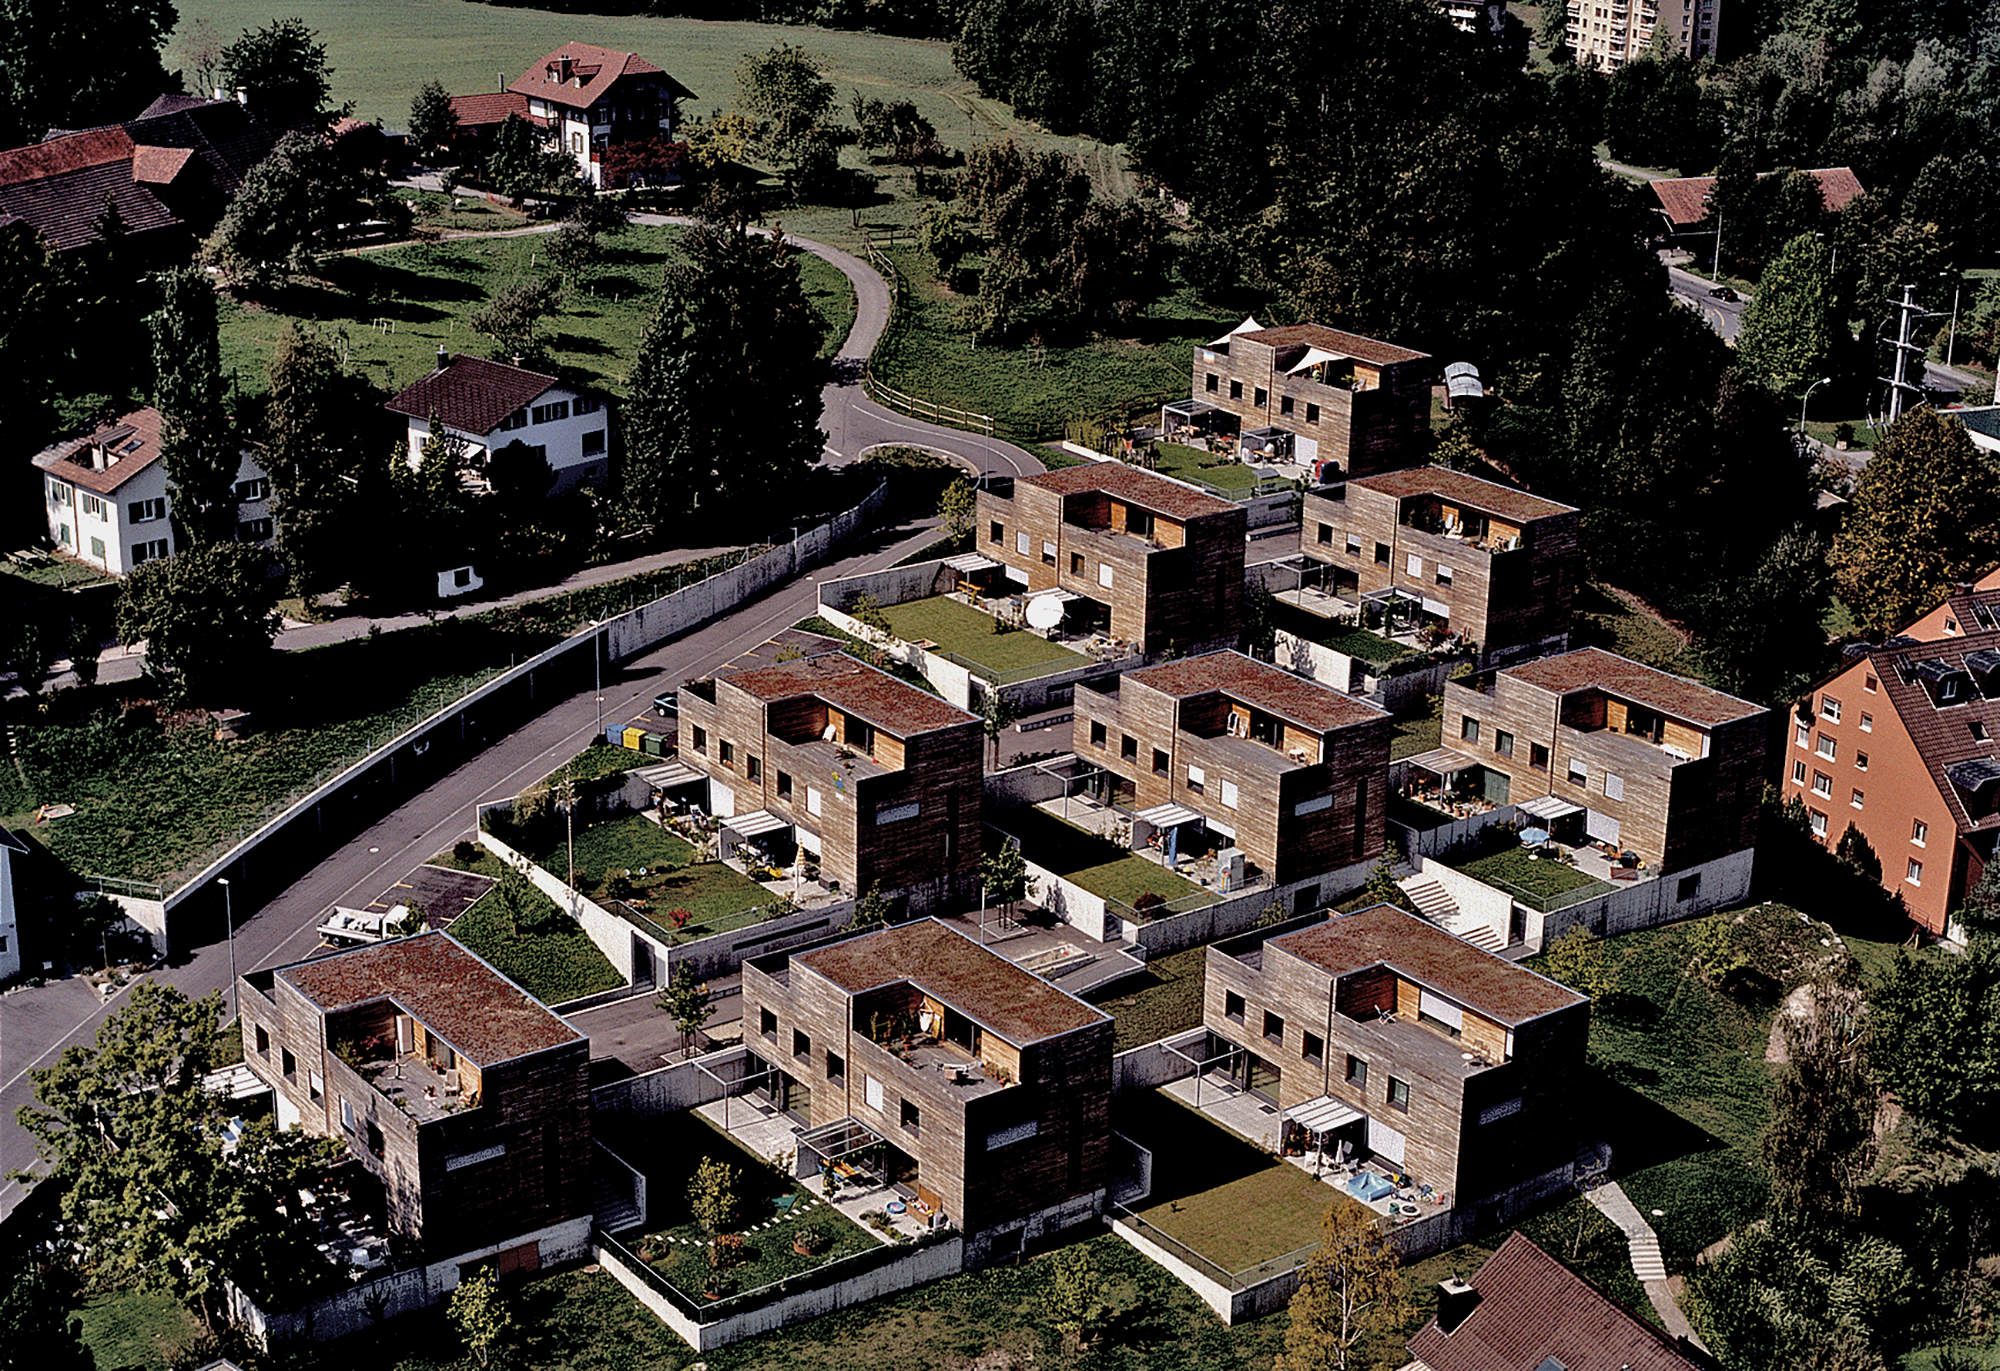 Renggli’s second passive house «Senti» in Kriens, built for the Lucerne Pension Fund